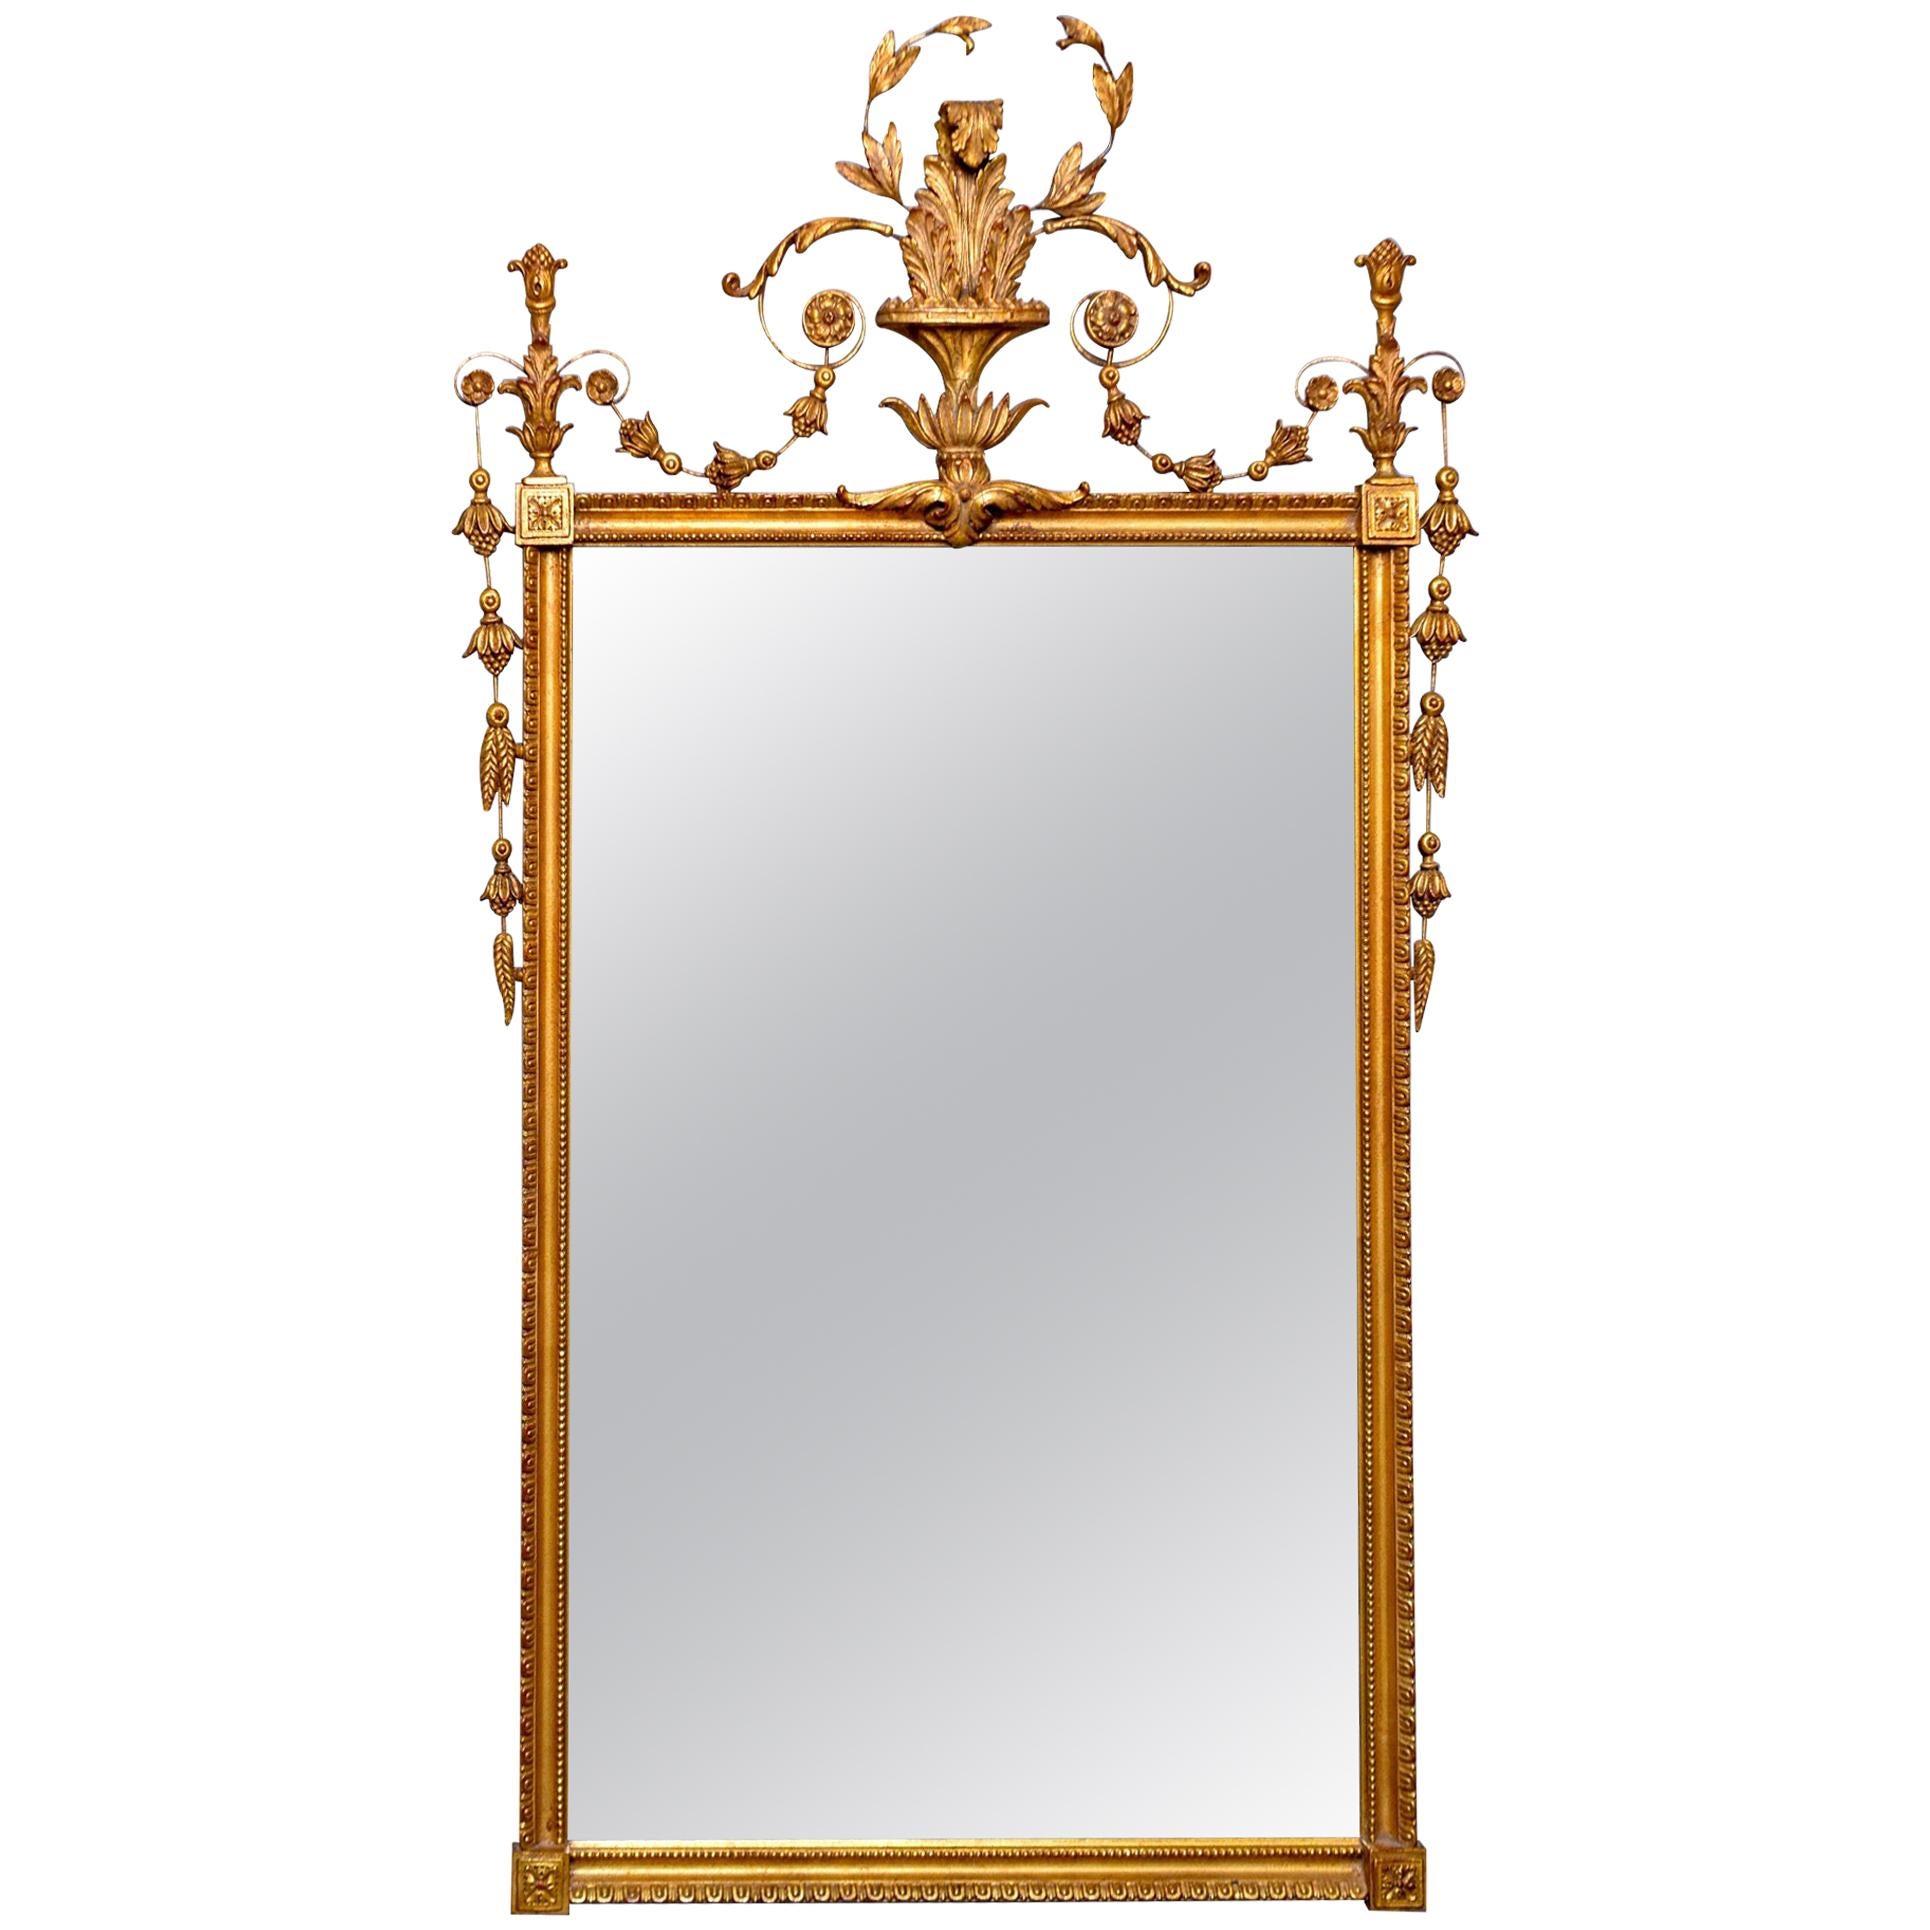 Vintage Giltwood Mirror with Fancy Crest